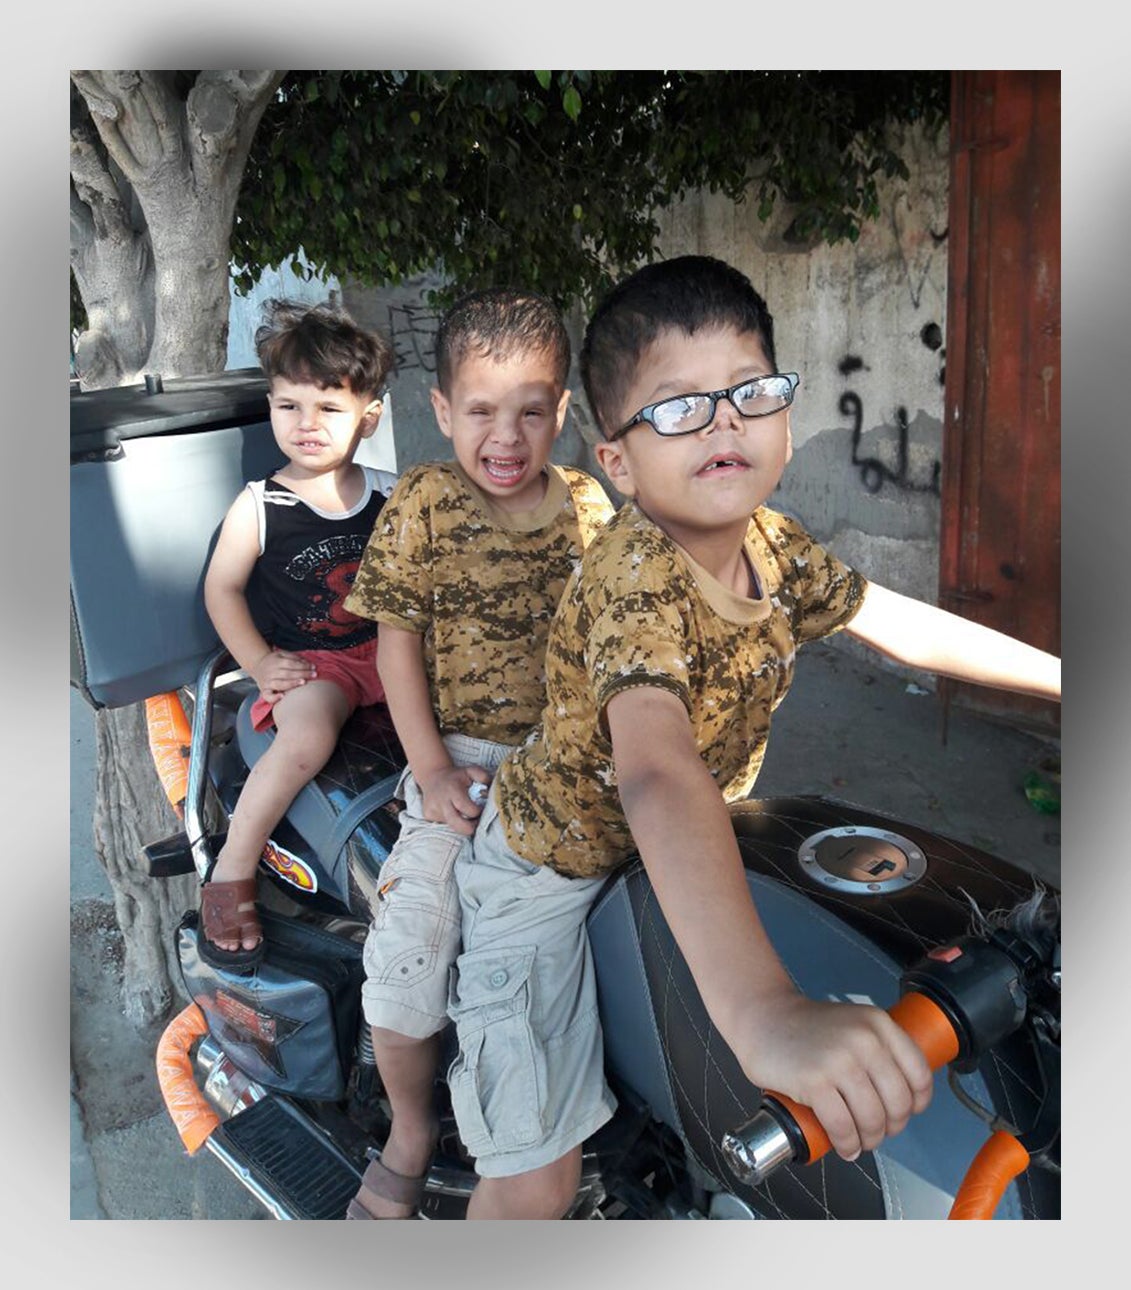 Farid Sallout, 12, and his brother Qossay, 14